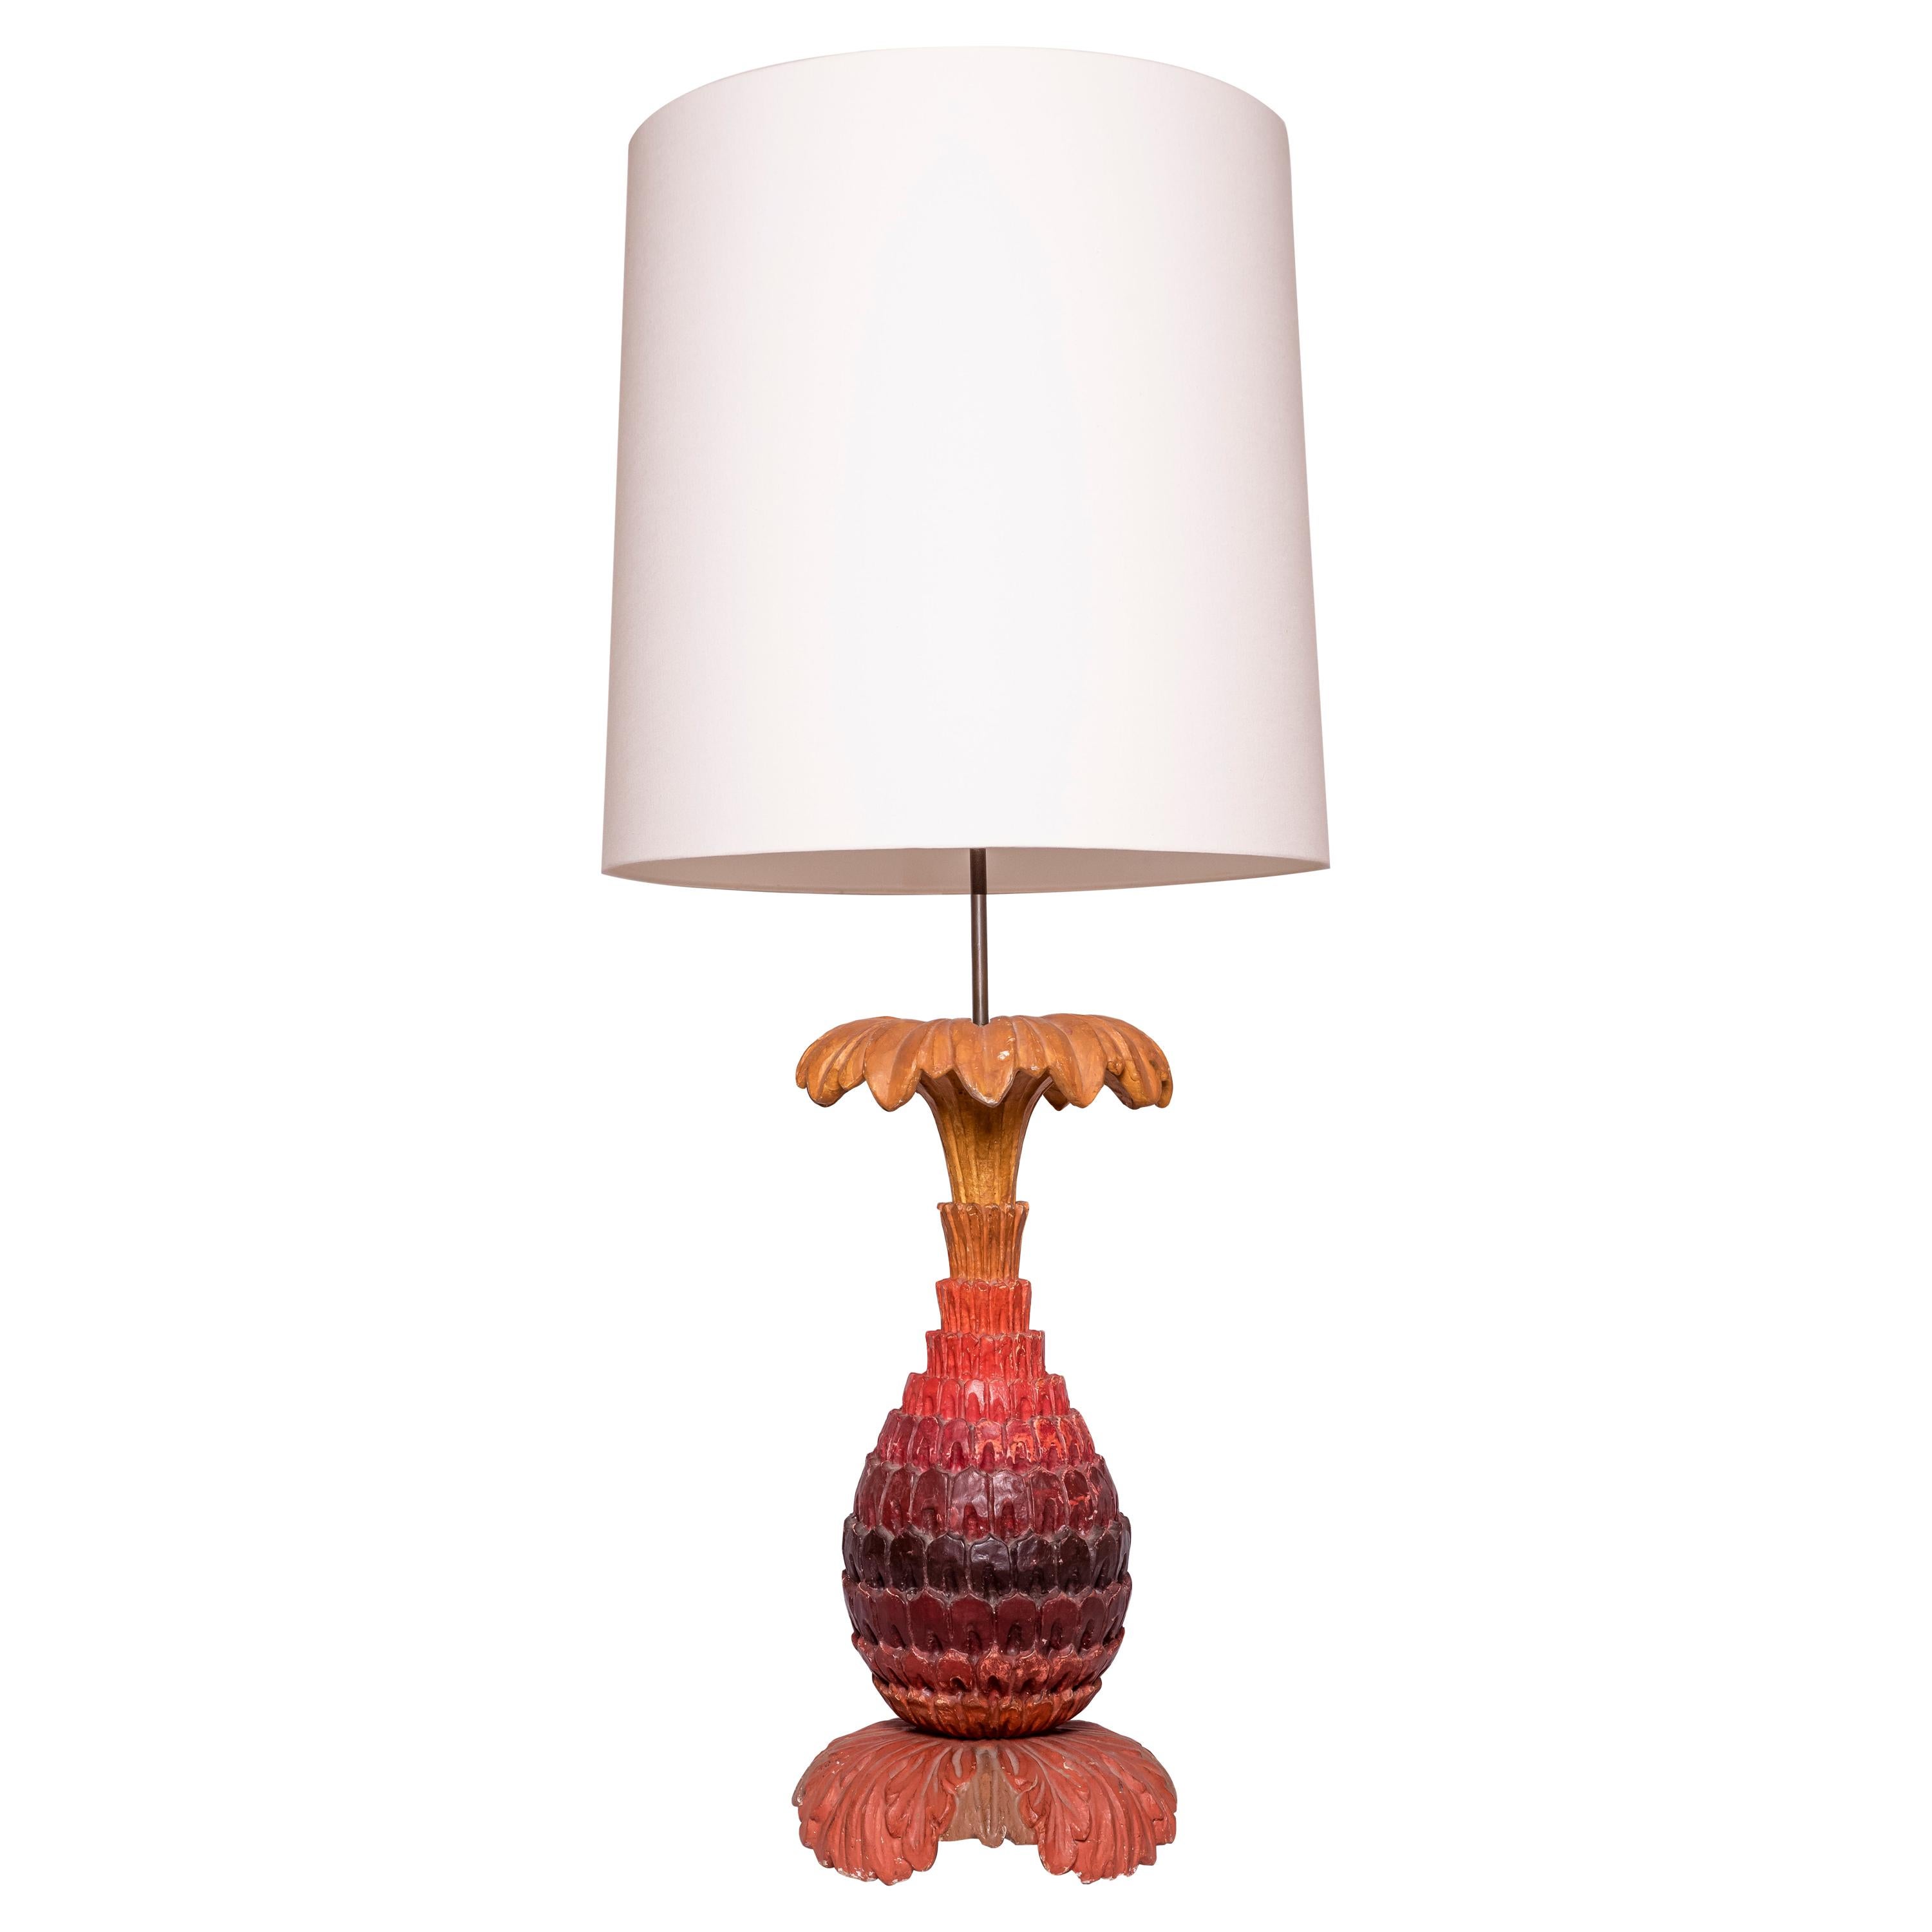 20th Century French Red Painted Pineapple Table Lamp by Maison Jansen For Sale